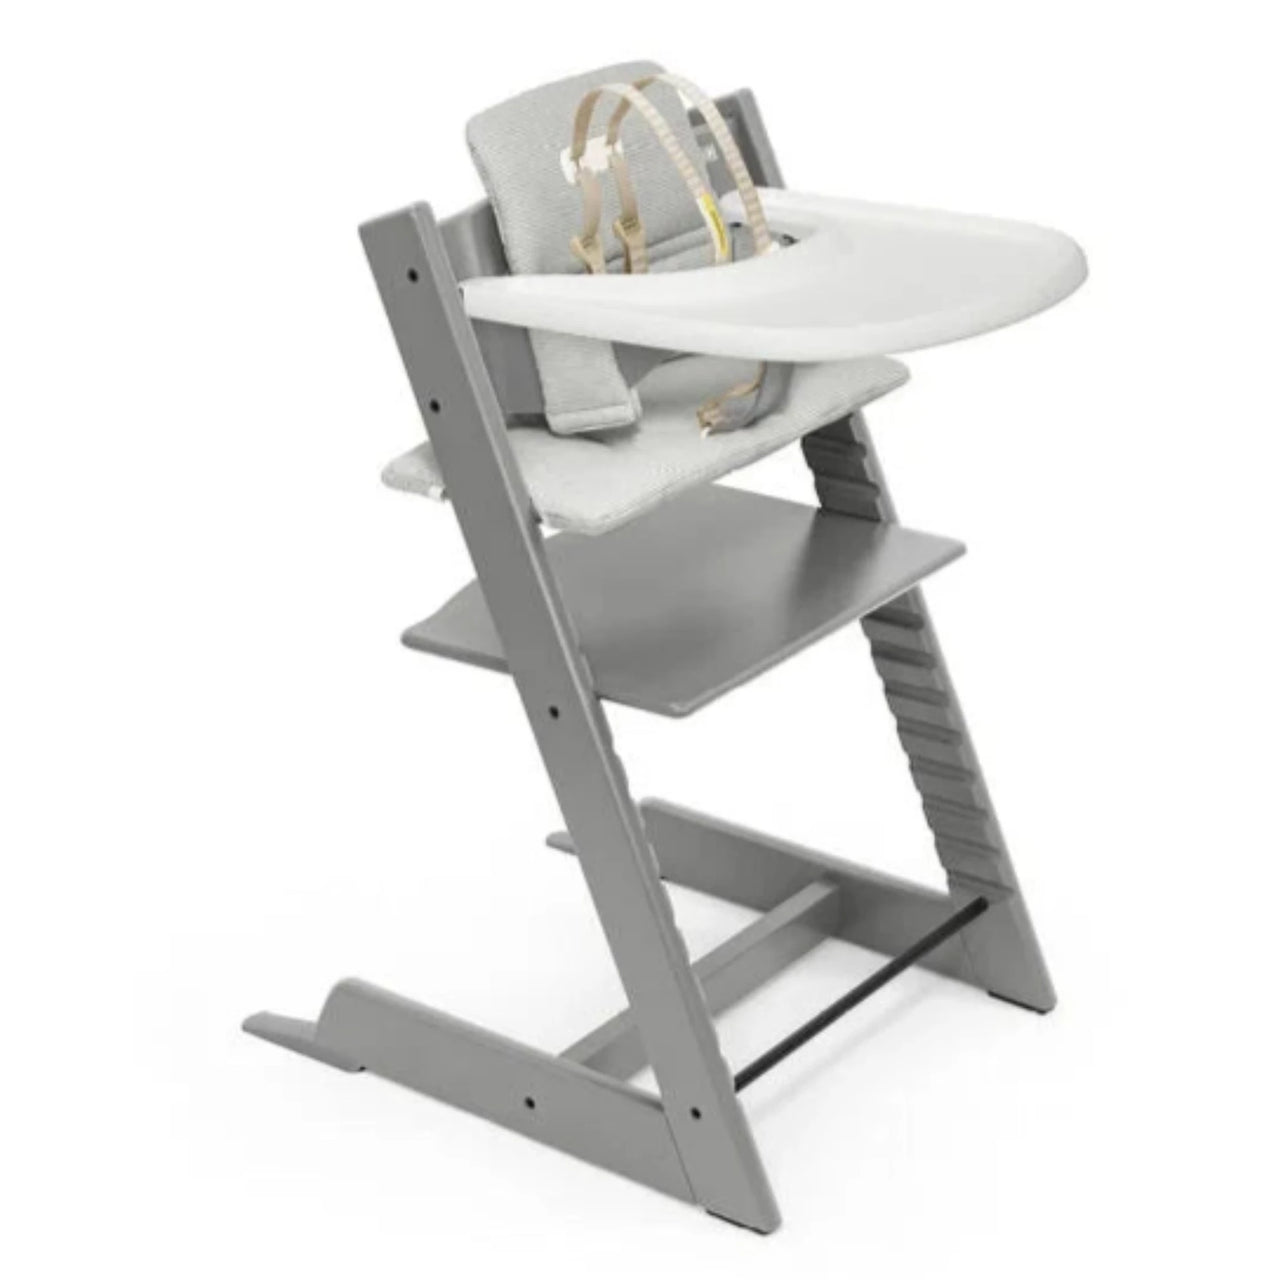 STOKKE Tripp Trapp Complete High Chair